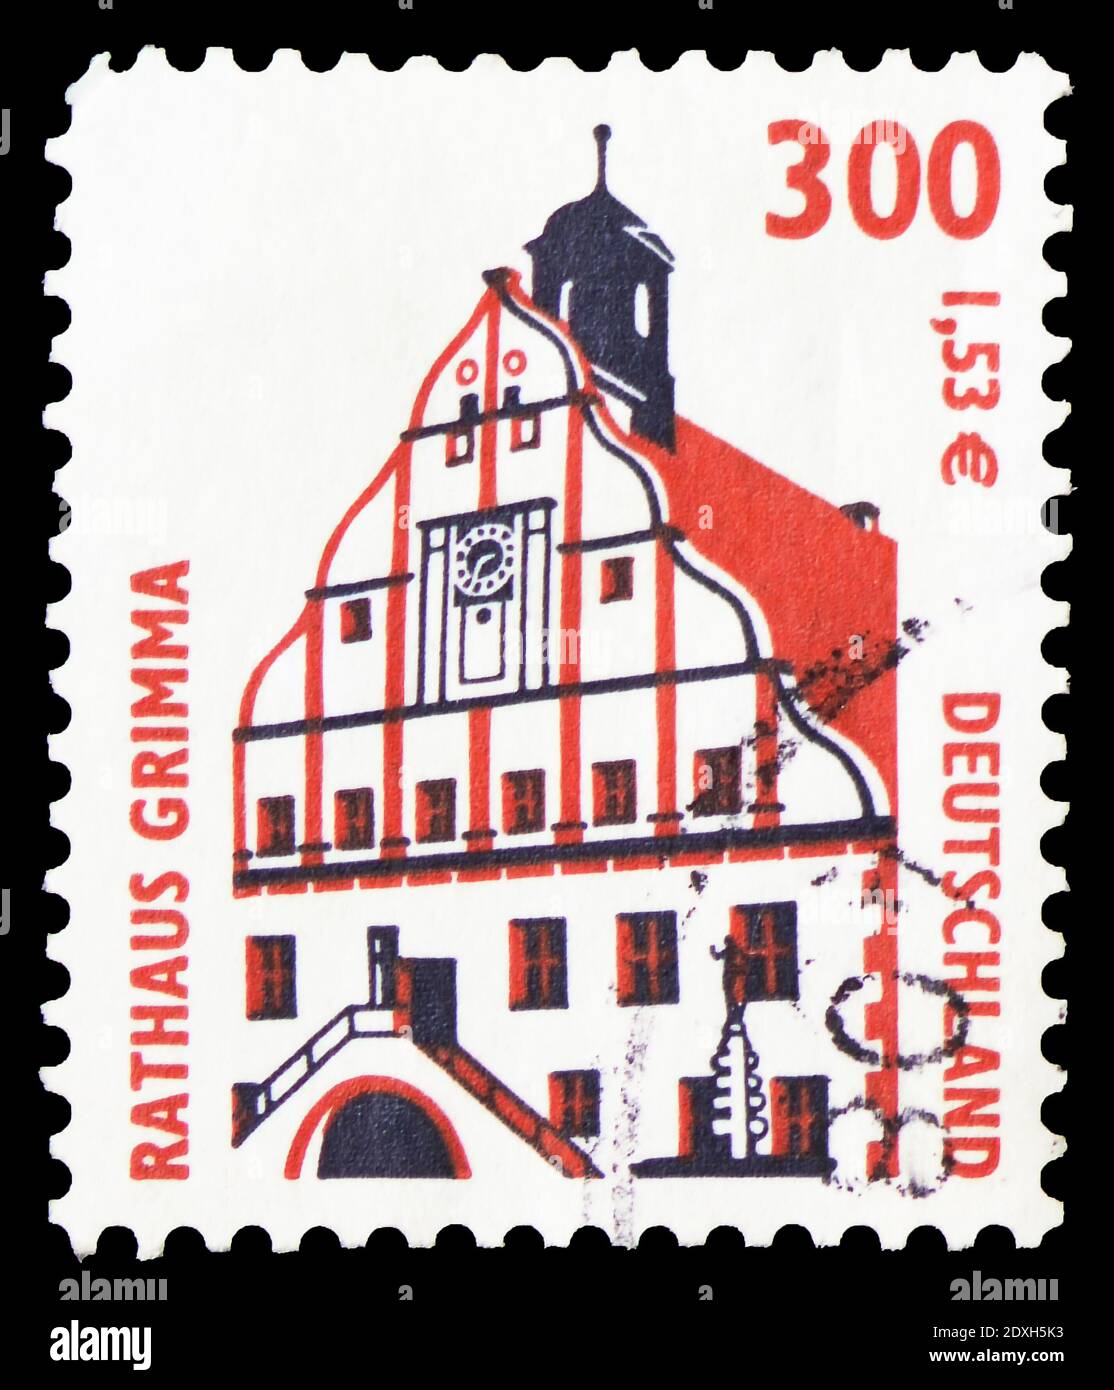 MOSCOW, RUSSIA - MARCH 30, 2019: A stamp printed in Germany shows Townhall, Grimma, Sights serie, circa 2000 Stock Photo